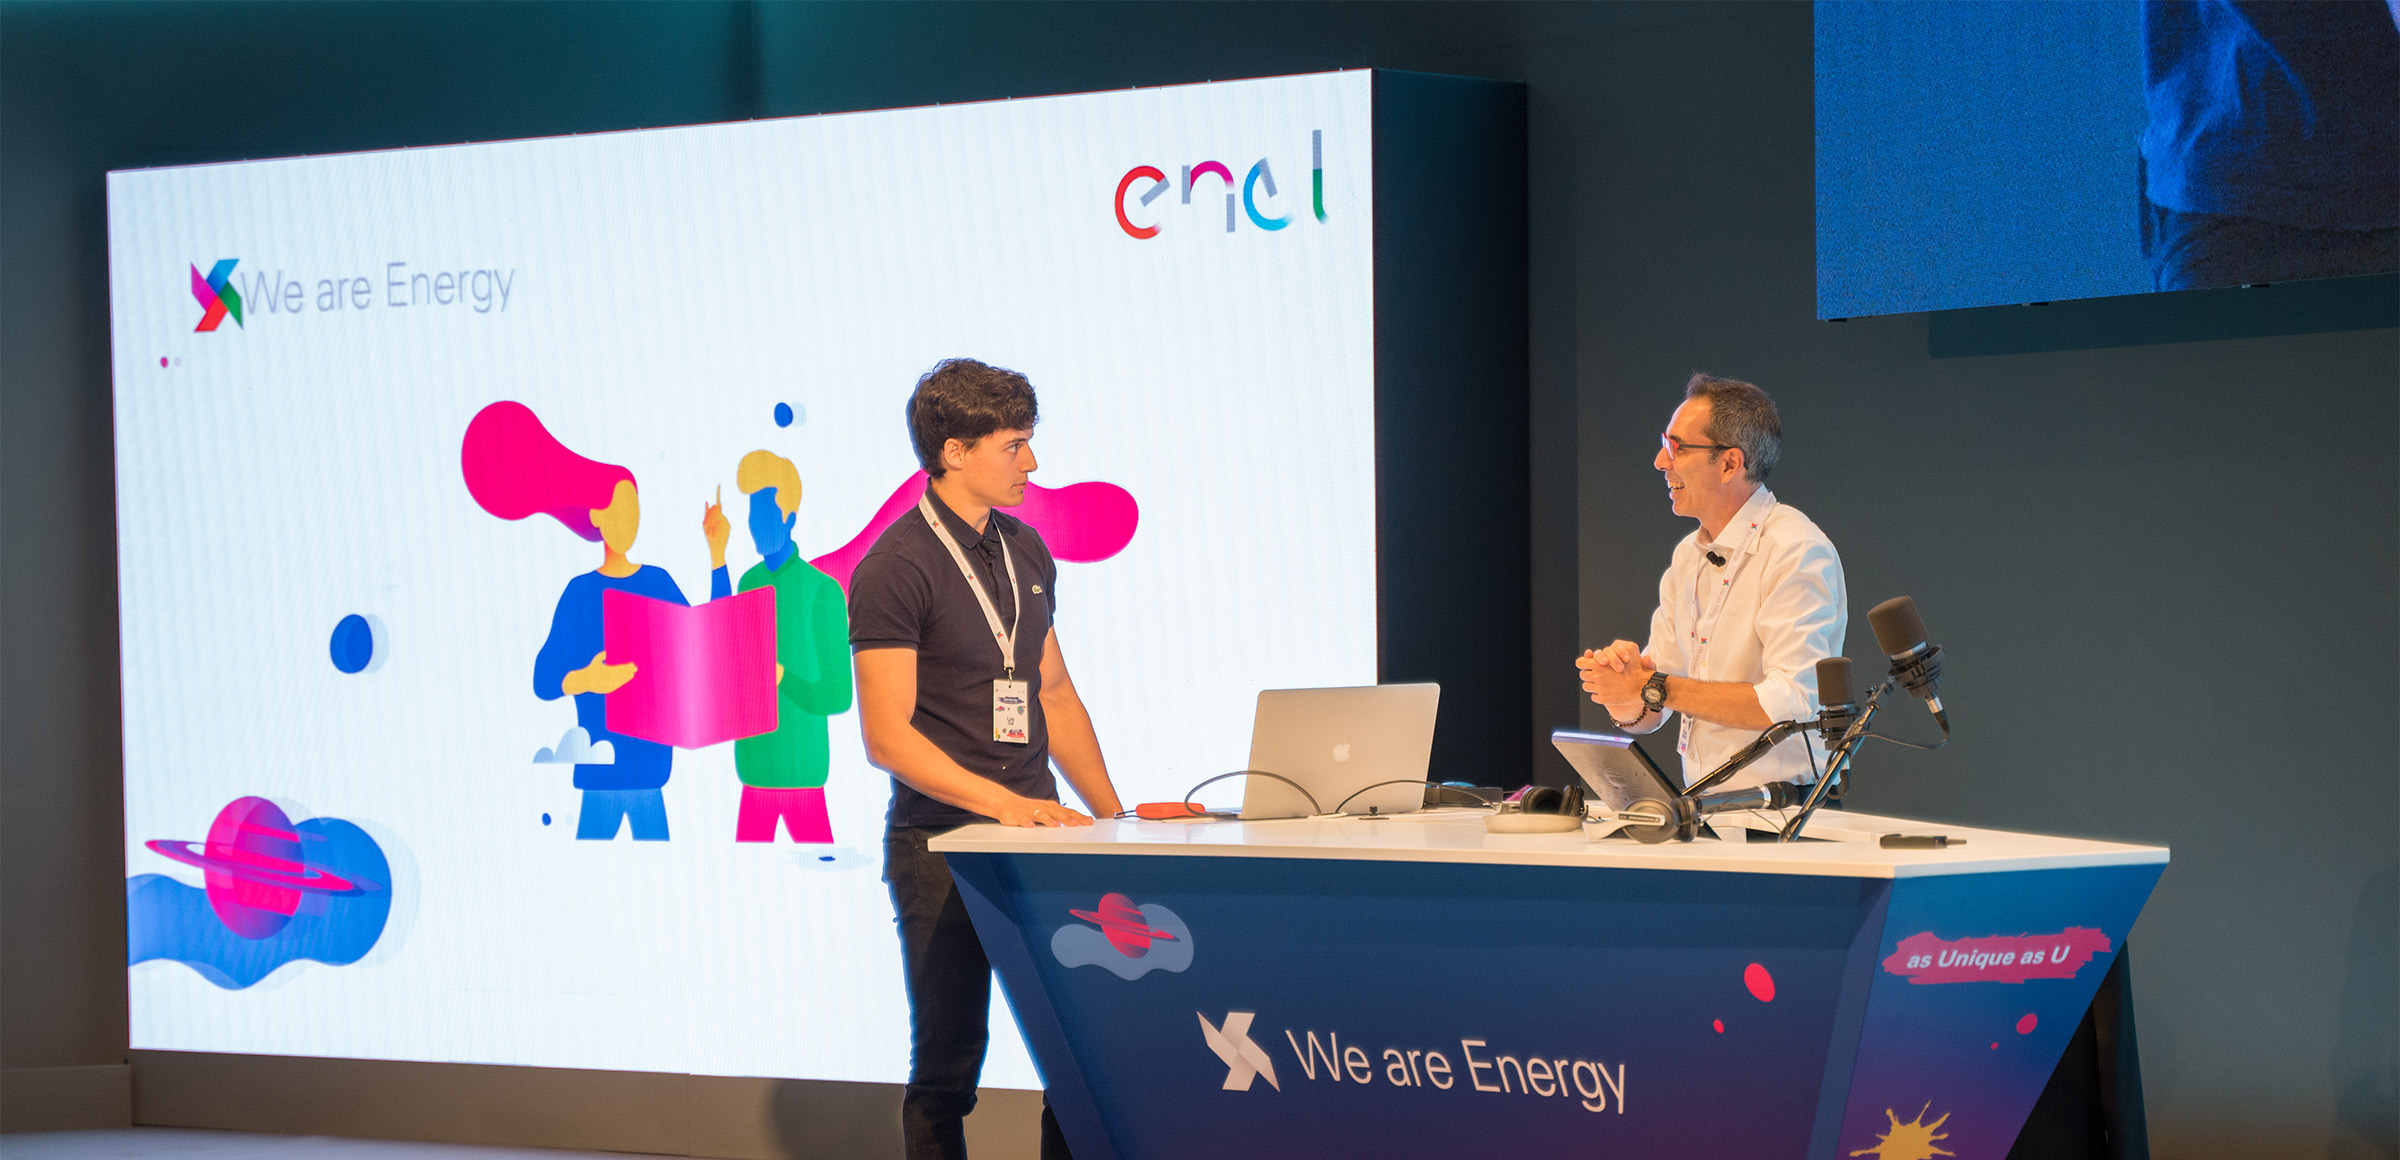 We are Energy 2019: diversity and inclusion were the themes at the